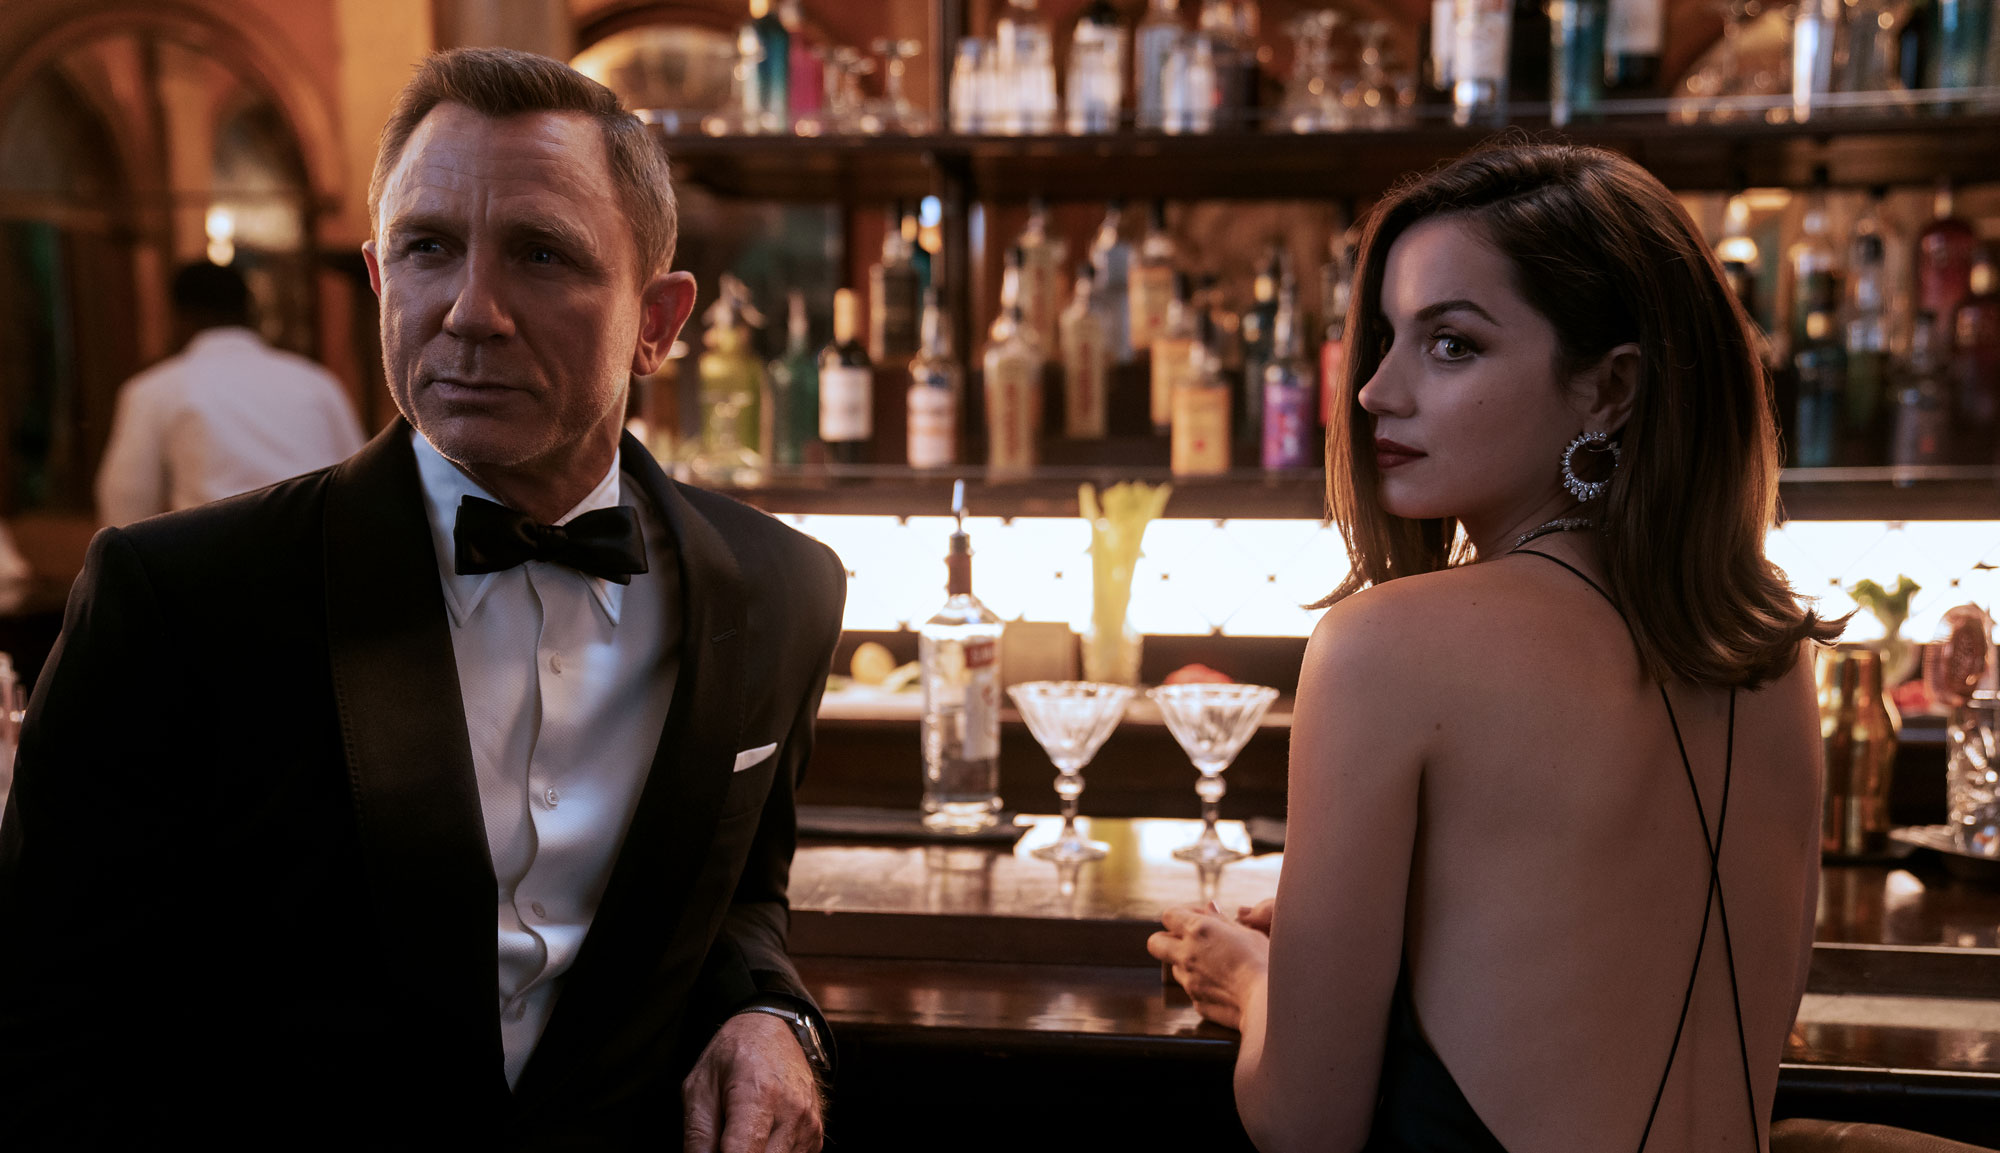 Daniel Craig and Ana de Armas in "No Time to Die"